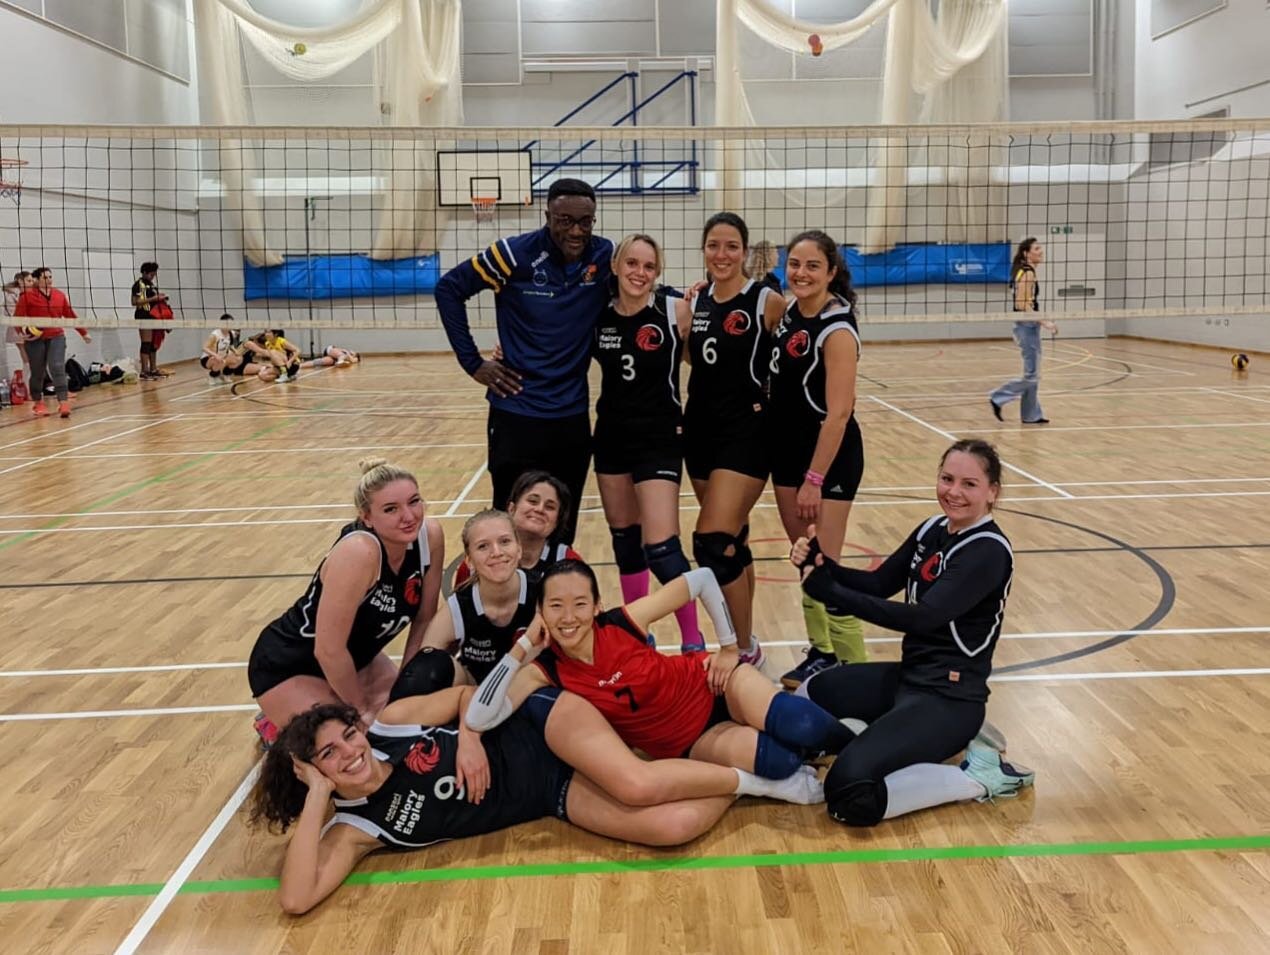 They did it again 🦅 

Our London League Division 1B team, Malory Red Eagles proved their hard work and team work at away tonight and won against @onyxvolleyball with full sets 2-3 🦅 

Keep flying high Eagles!

#LondonVolleyball #MaloryEagles #Malor